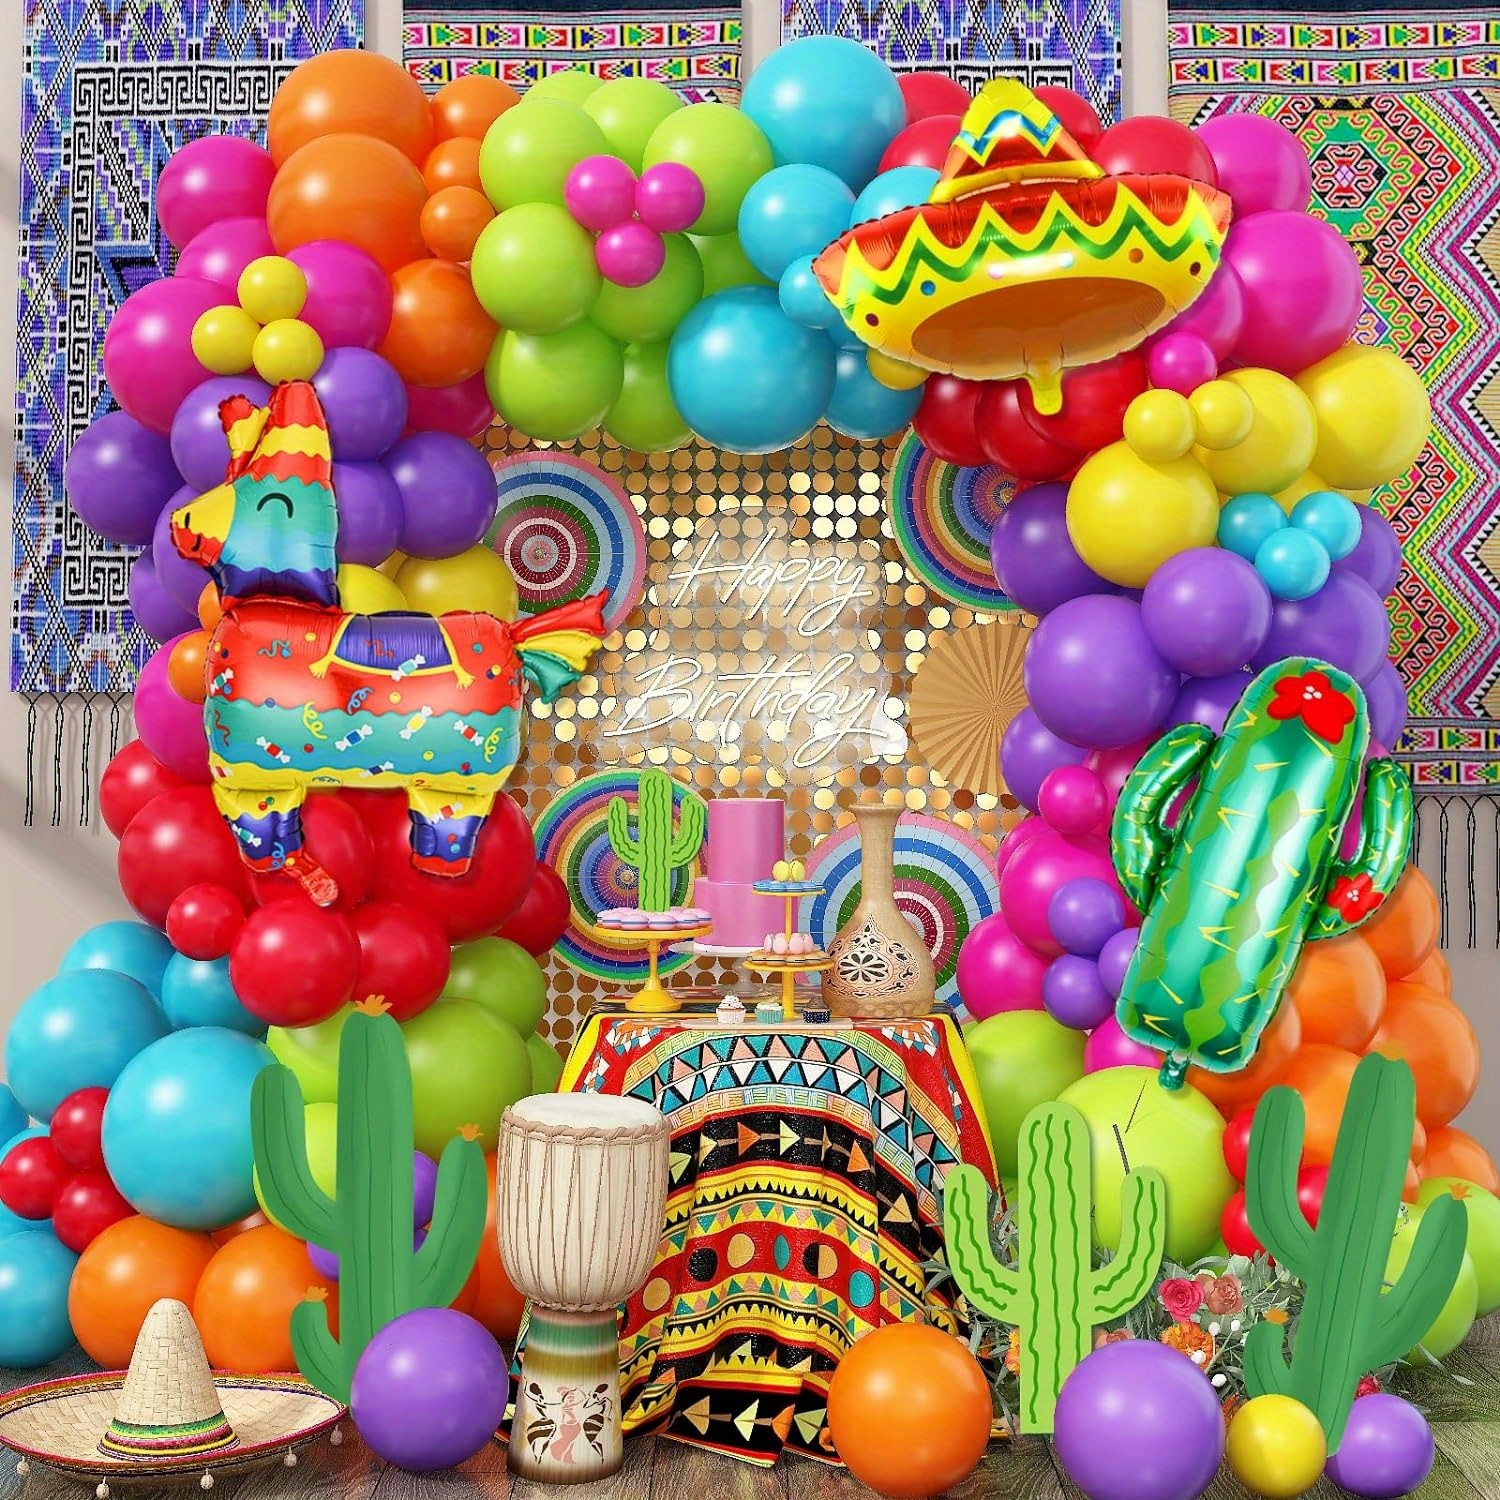 

120pcs, Vibrant Mexican Fiesta Party Kit - Lively Balloon Arch With Cactus, Llama, Pinata Designs - Perfect For Cinco De Mayo, Taco Bars, Birthdays & Themed Celebrations